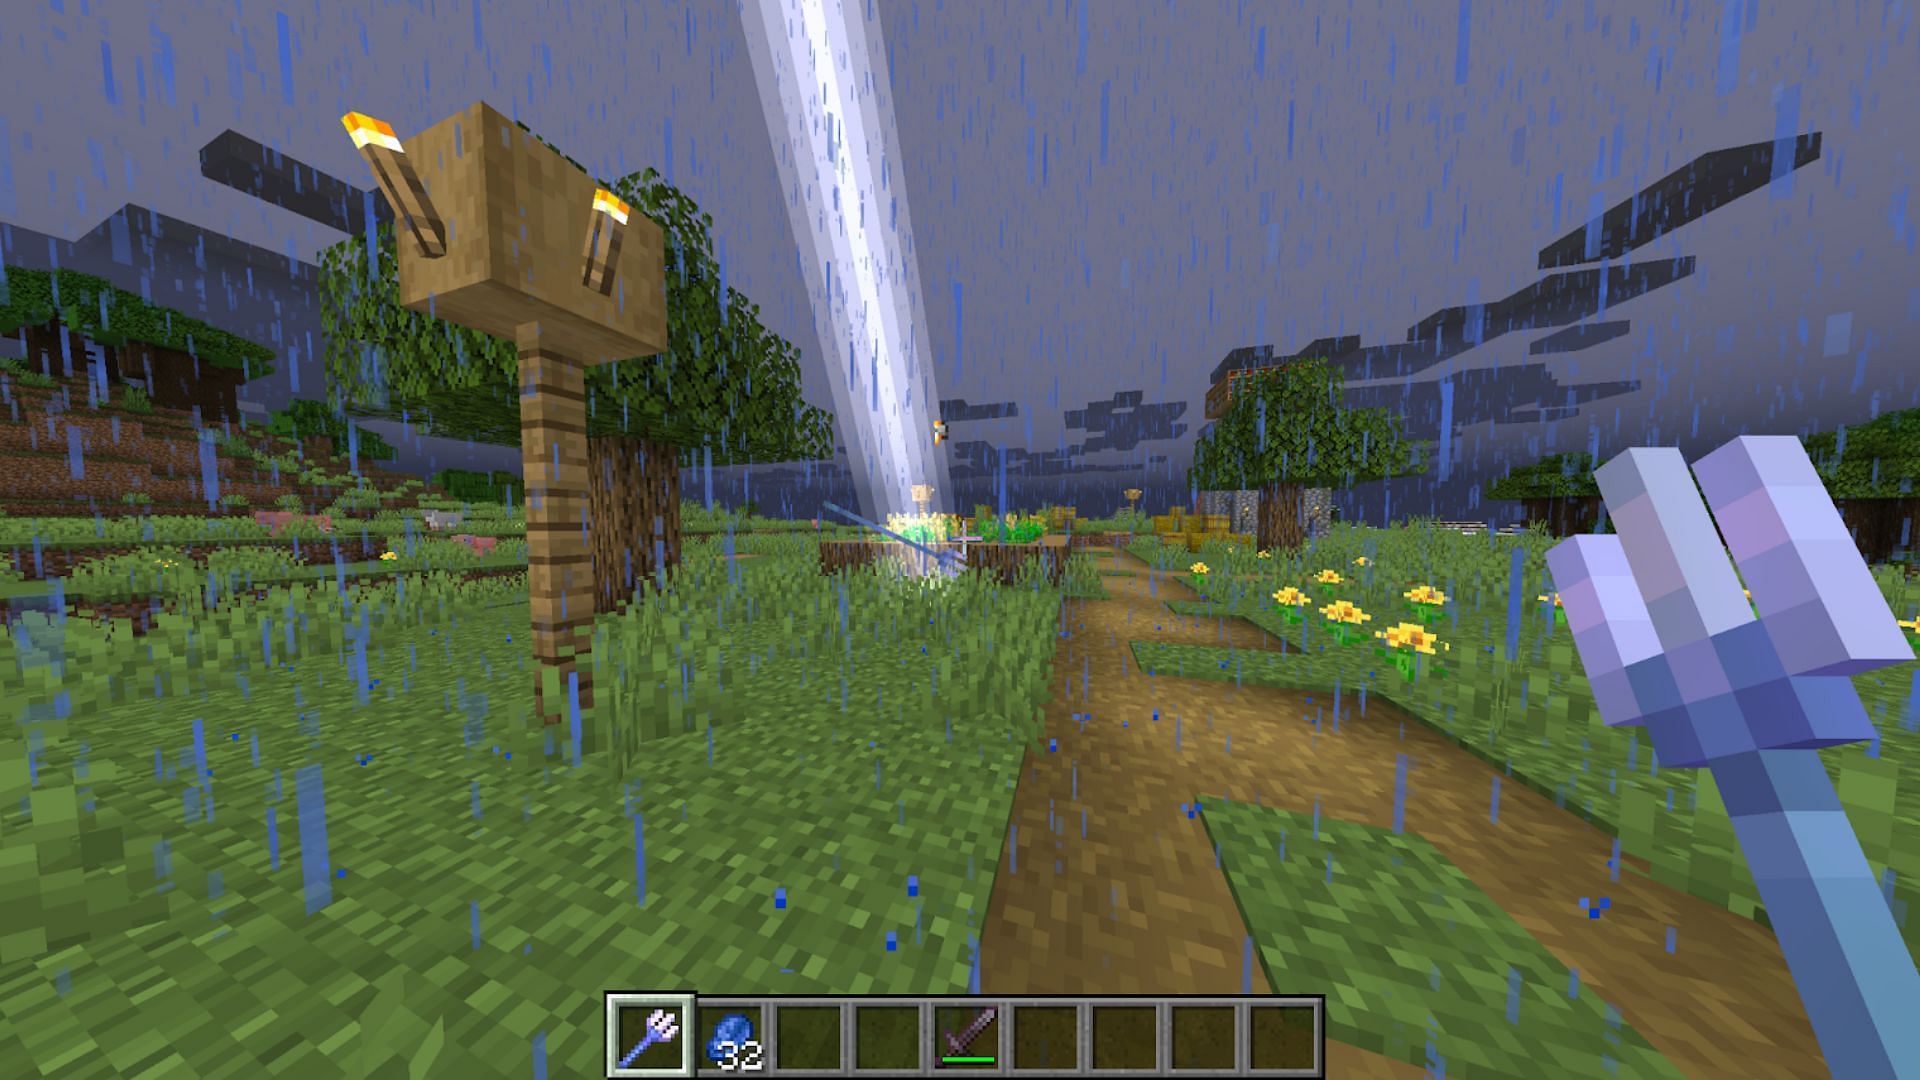 Gamers can play around with channeling enchantment in Minecraft (Image via Mojang)